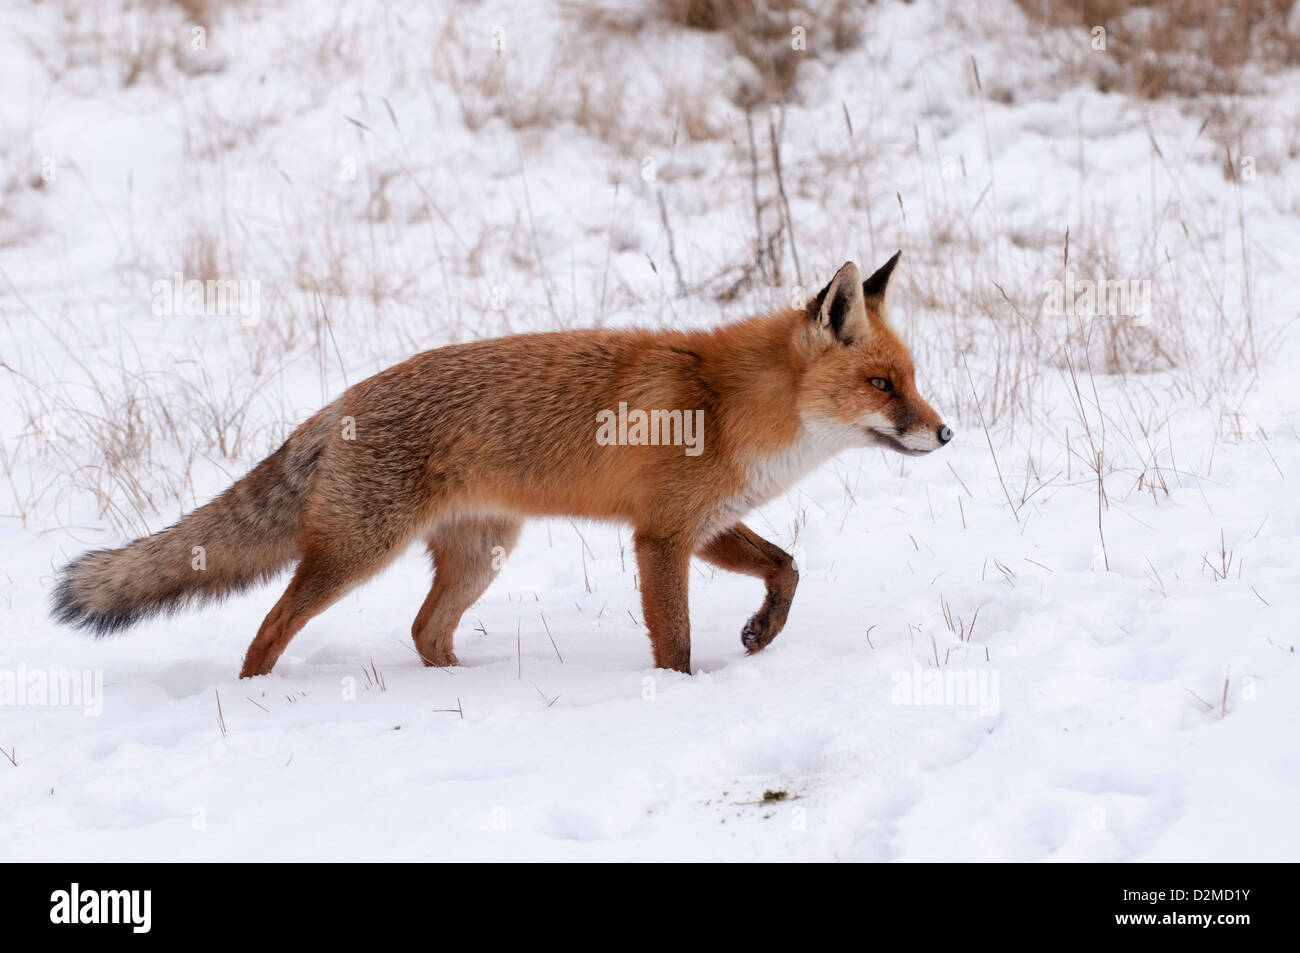 Red fox walking in snow Stock Photo